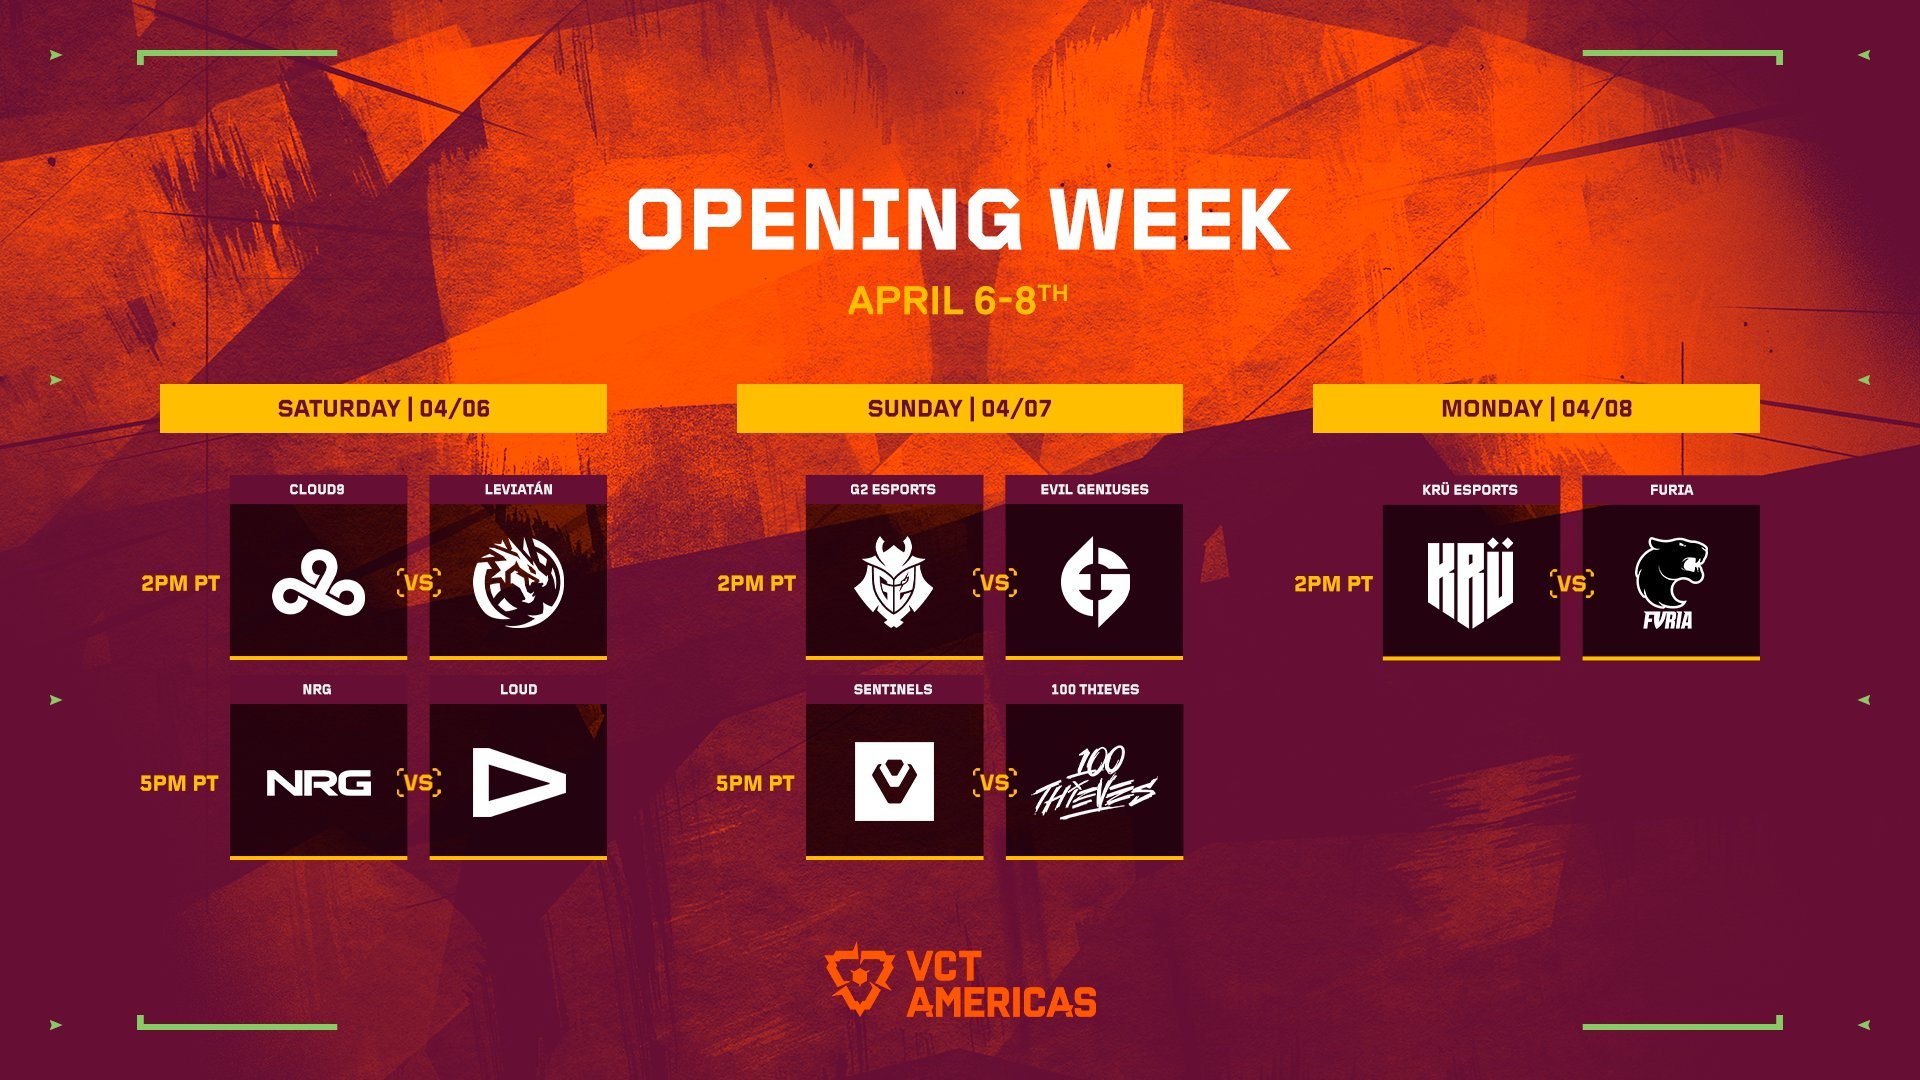 The VCT Americas opening weekend graphic